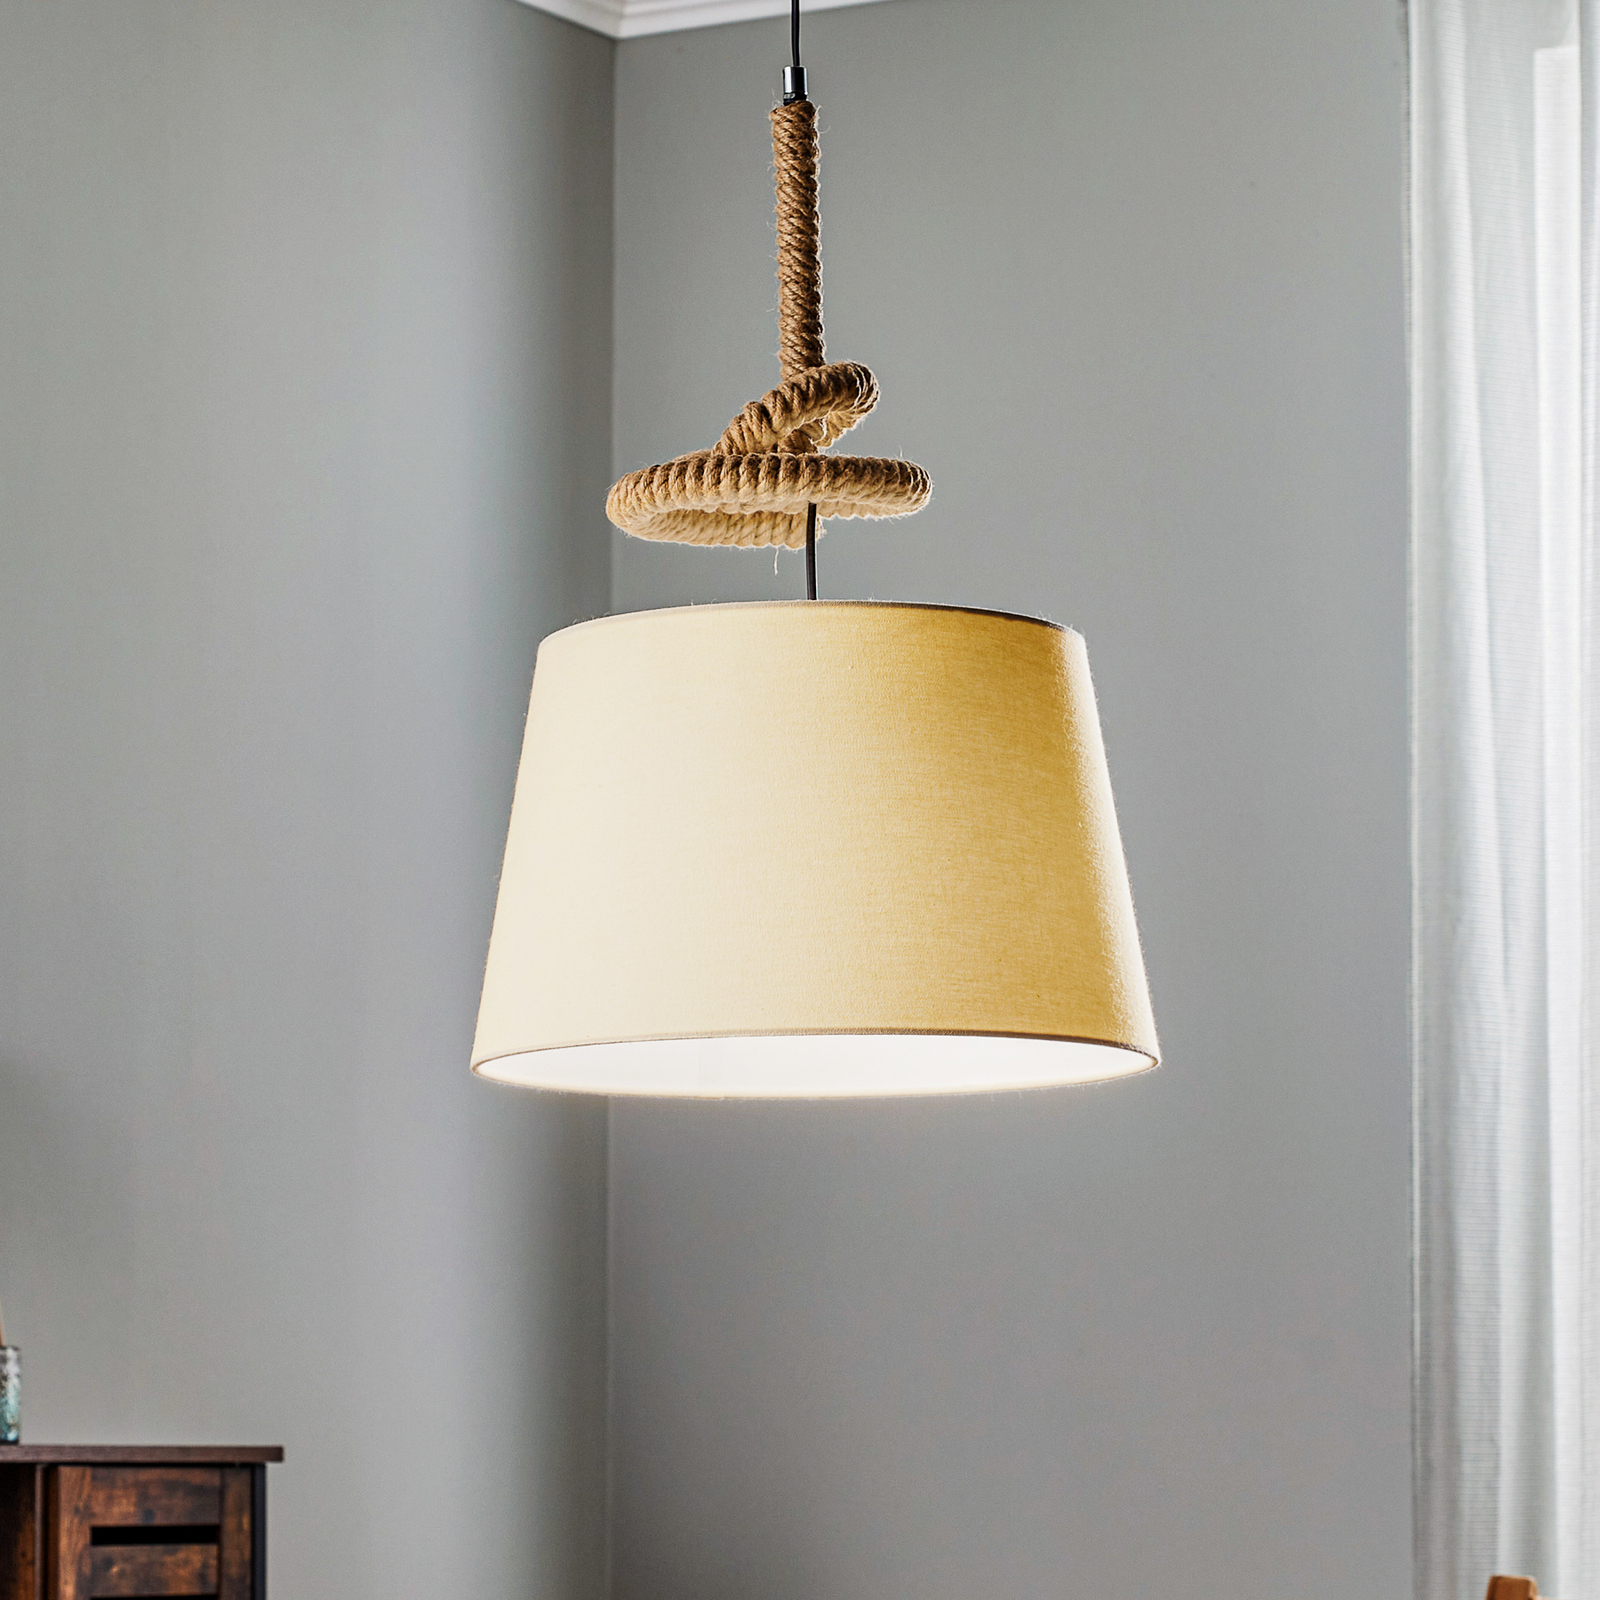 Corda pendant light with fabric shade Rope knot